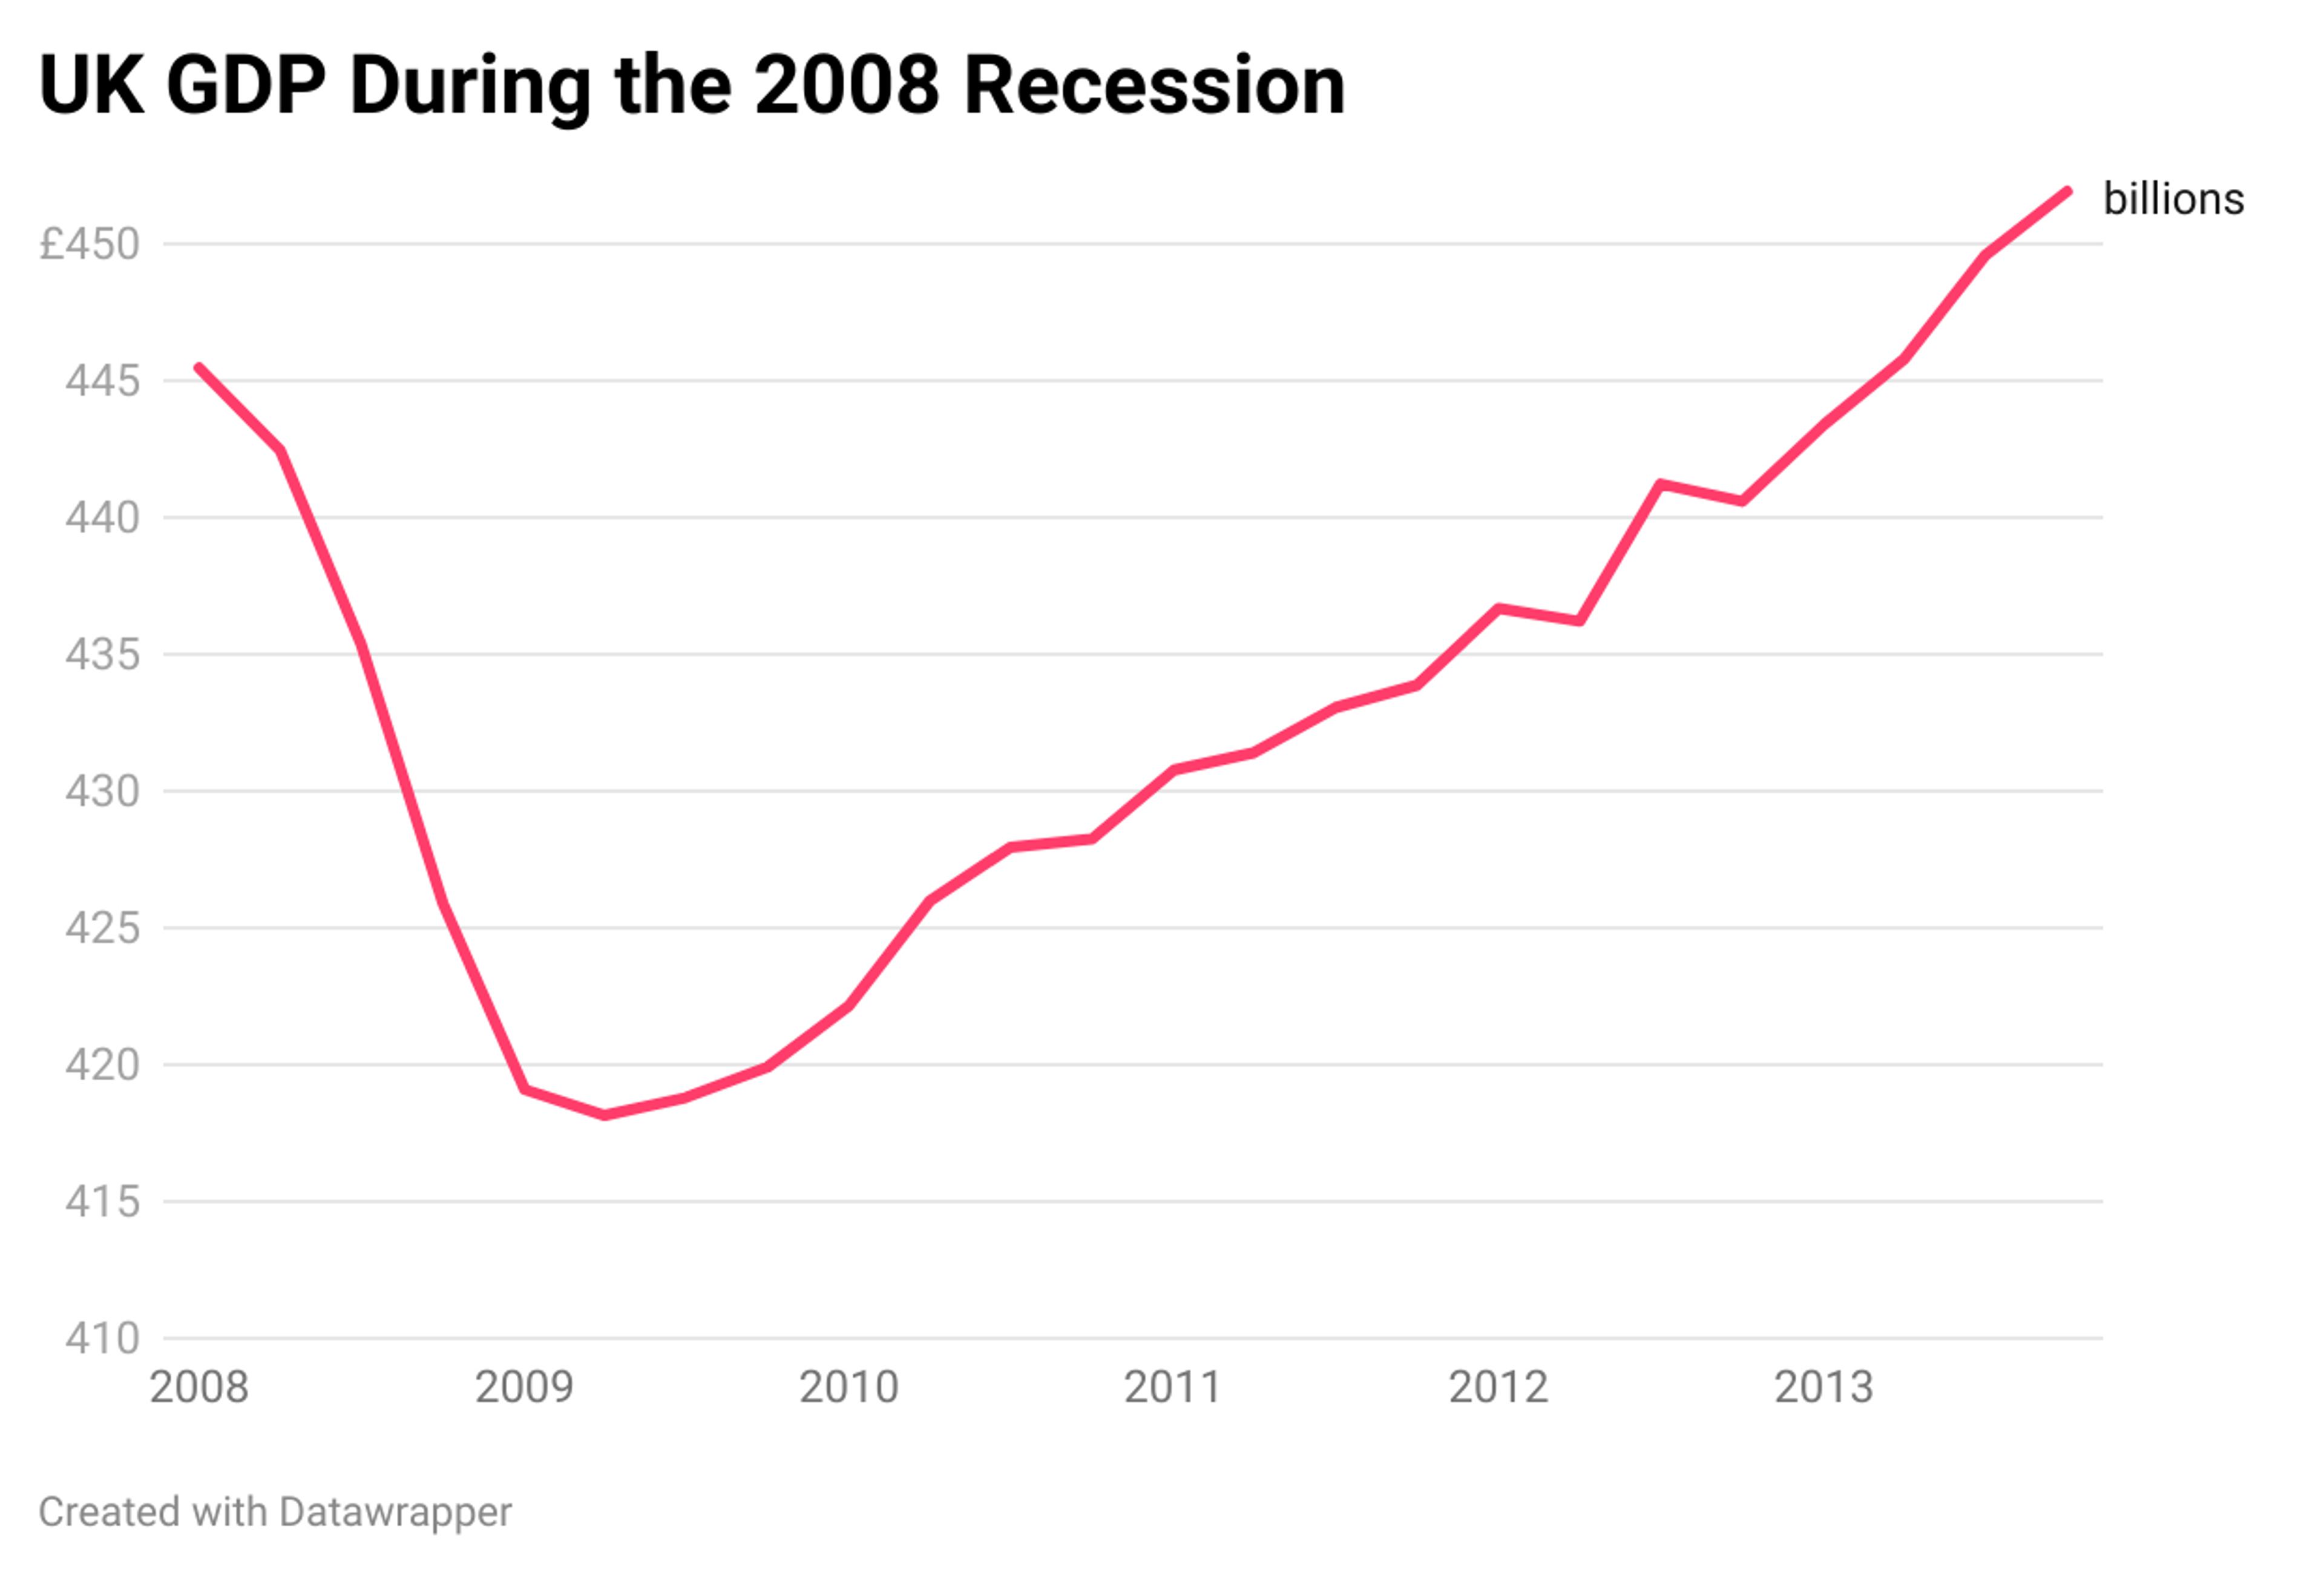 A line chart showing UK GDP during the 2008 recession